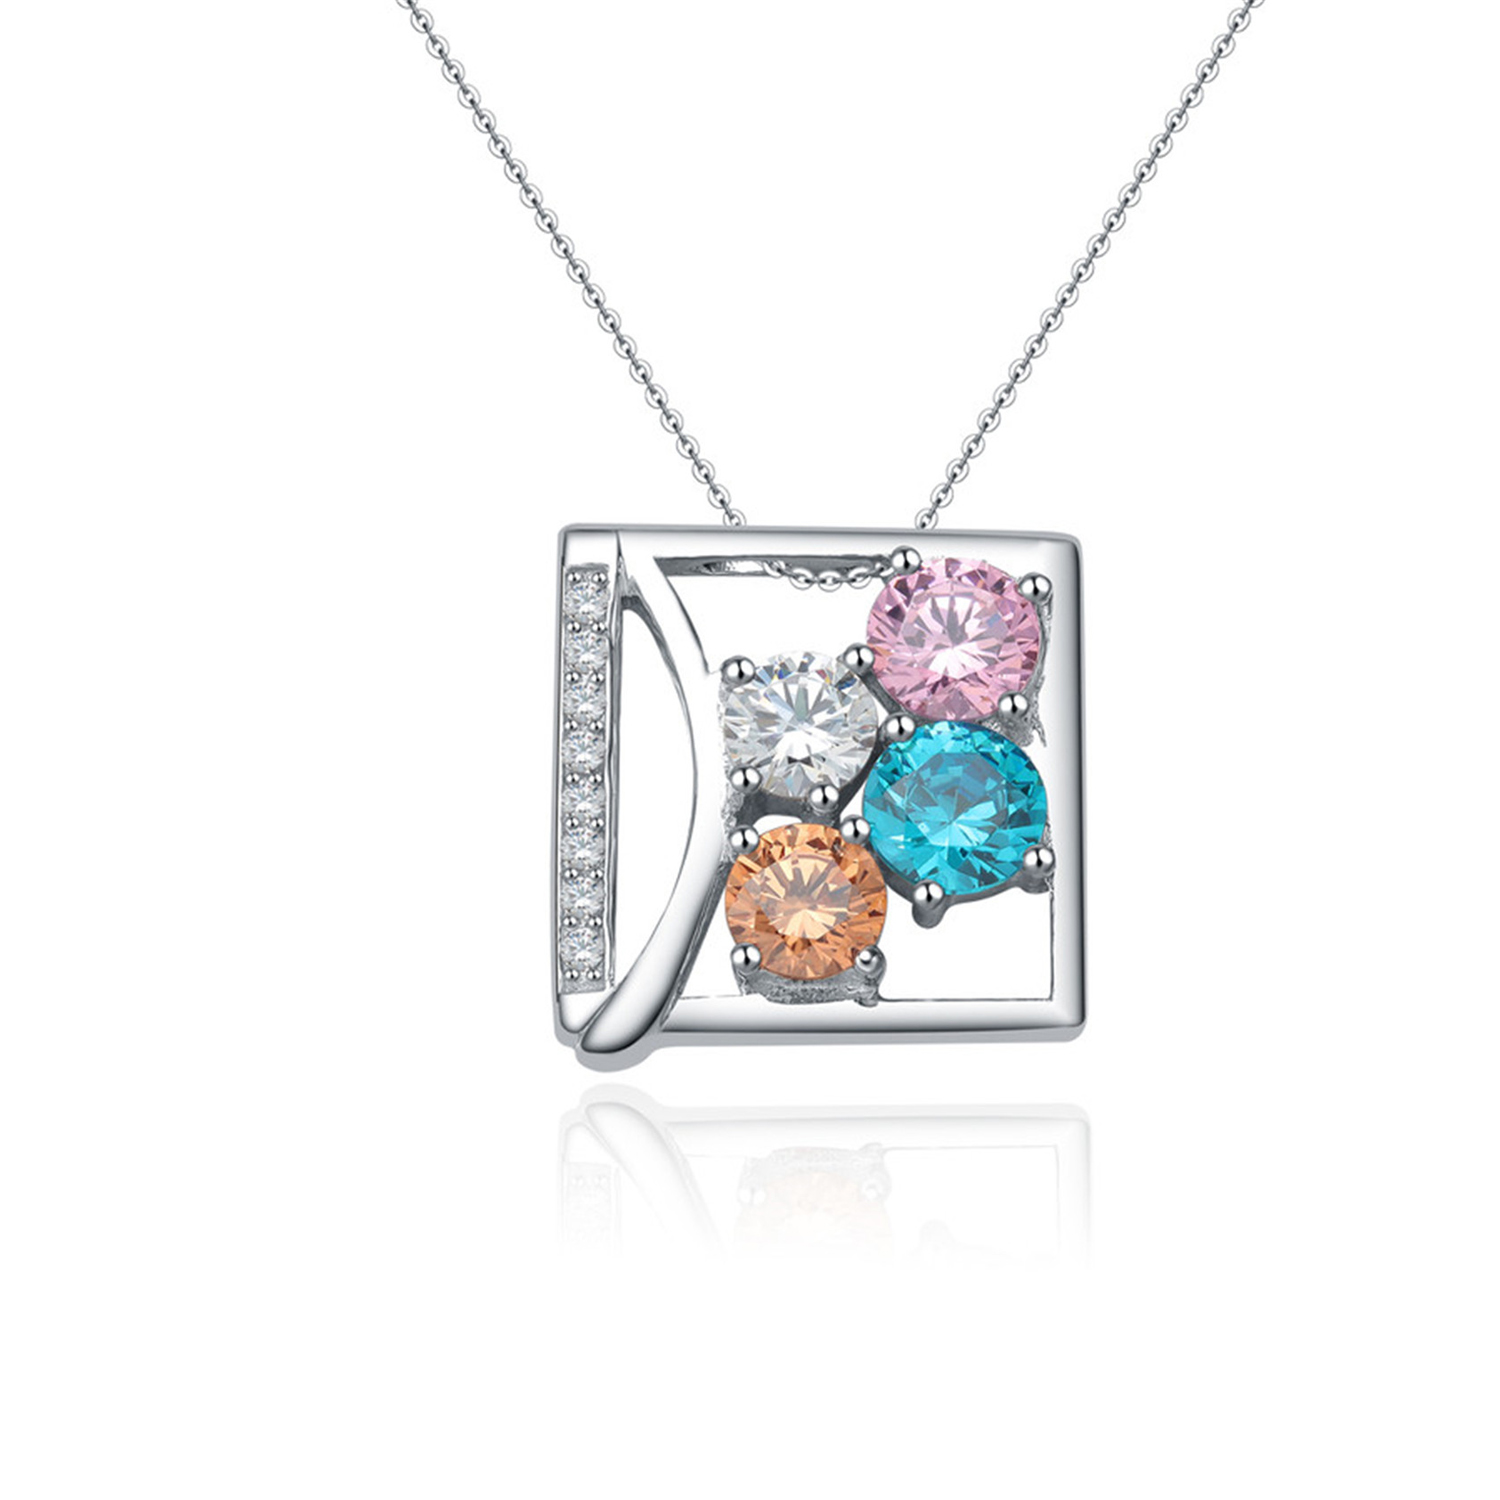 Square Colorful Cubic Zirconia Pendant Necklace 925 Sterling Silver Charming silver Necklace Jewelry(图1)